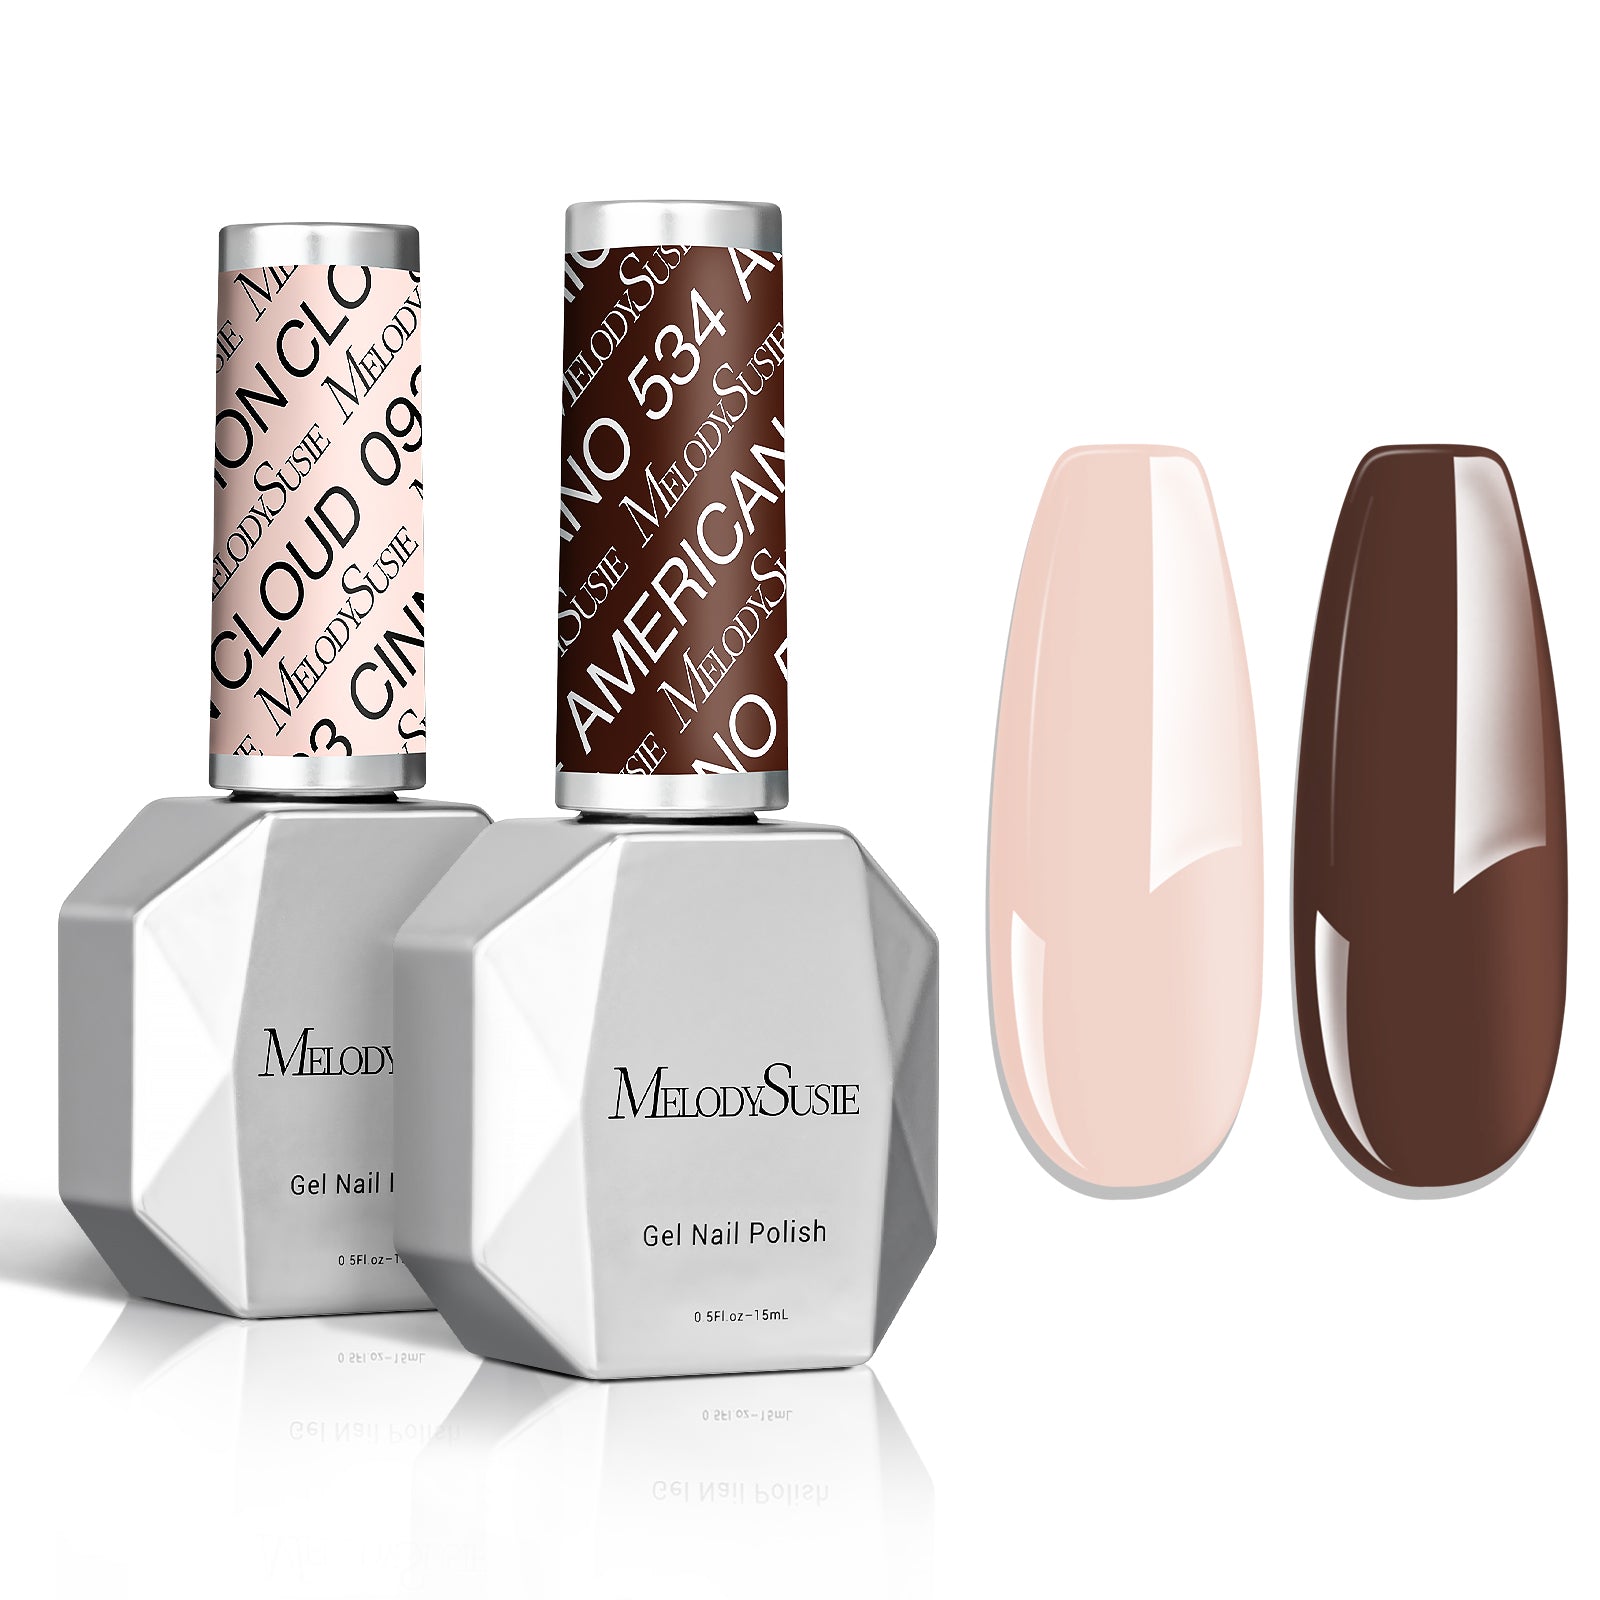 2 Pack 15ml Gel Nail Polish (Nude Pink and Brown)